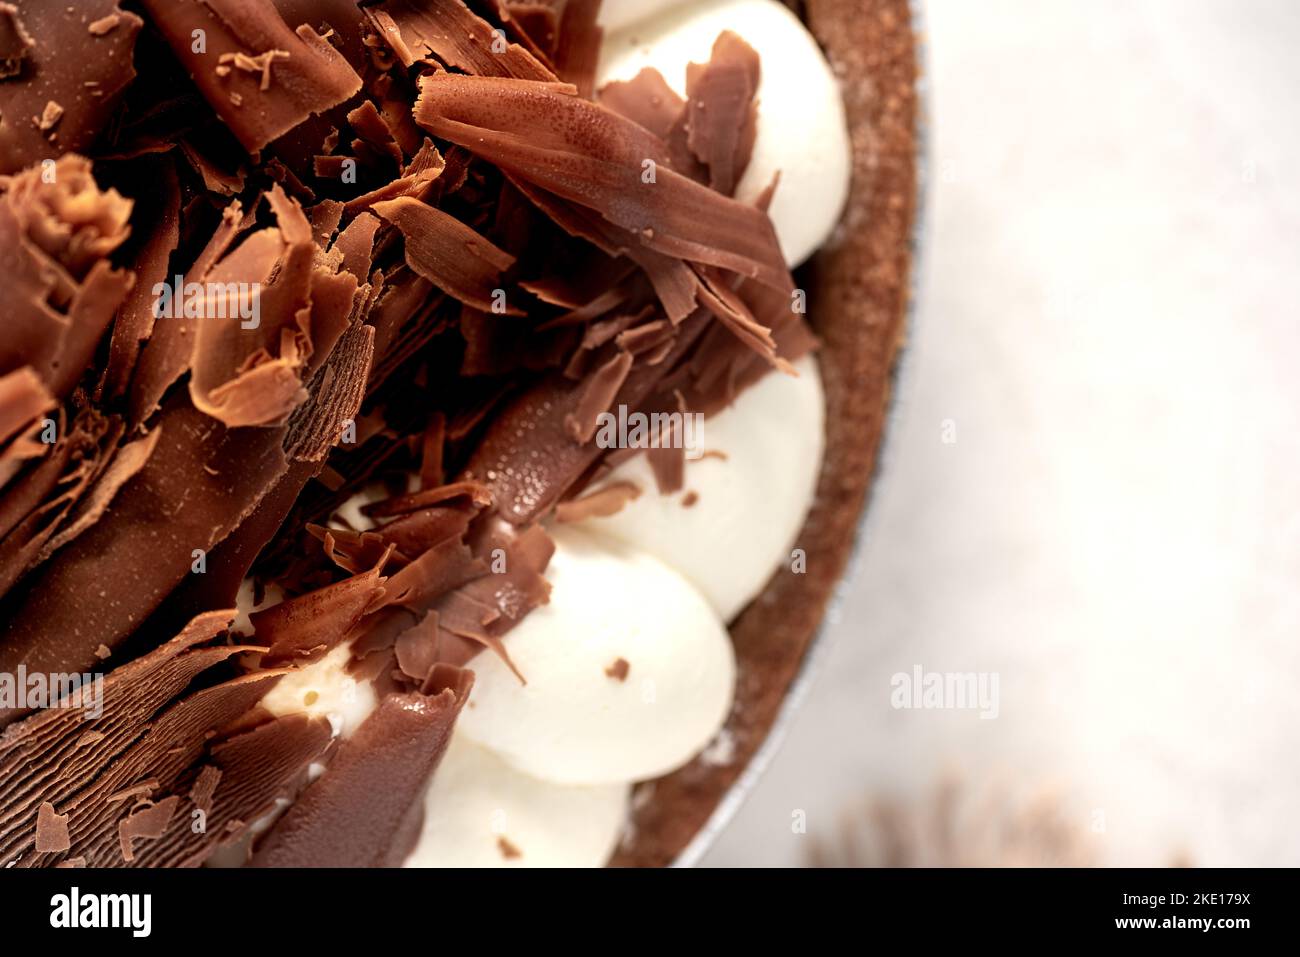 Close up of the edge of a chocolate pie with chocolate shavings Stock Photo